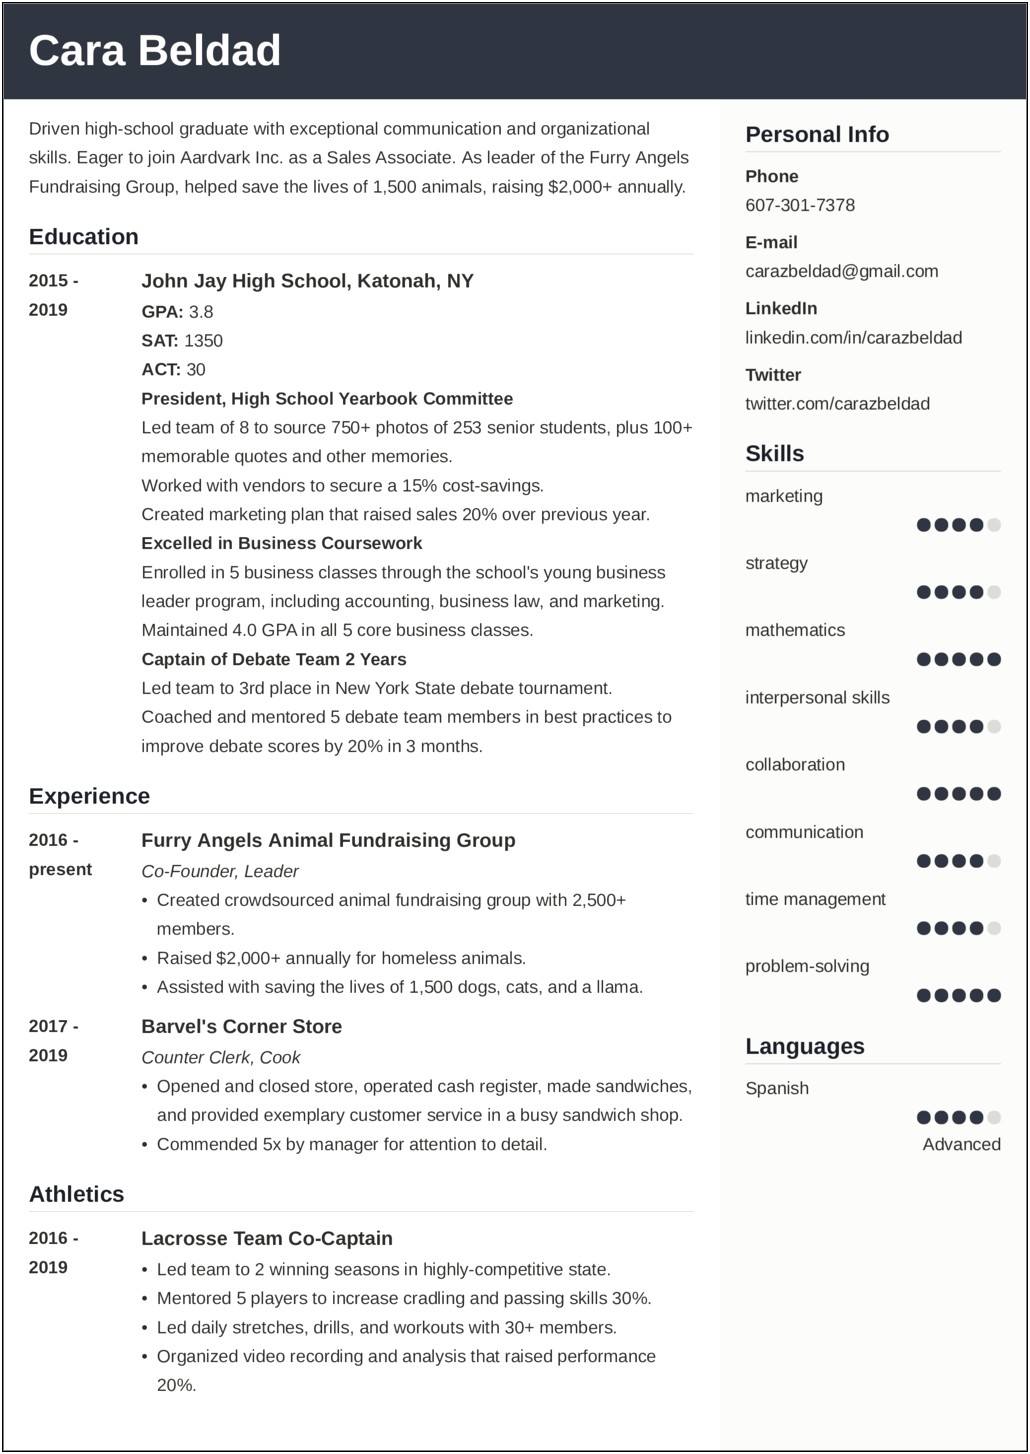 Sample Resume One Page High School Student